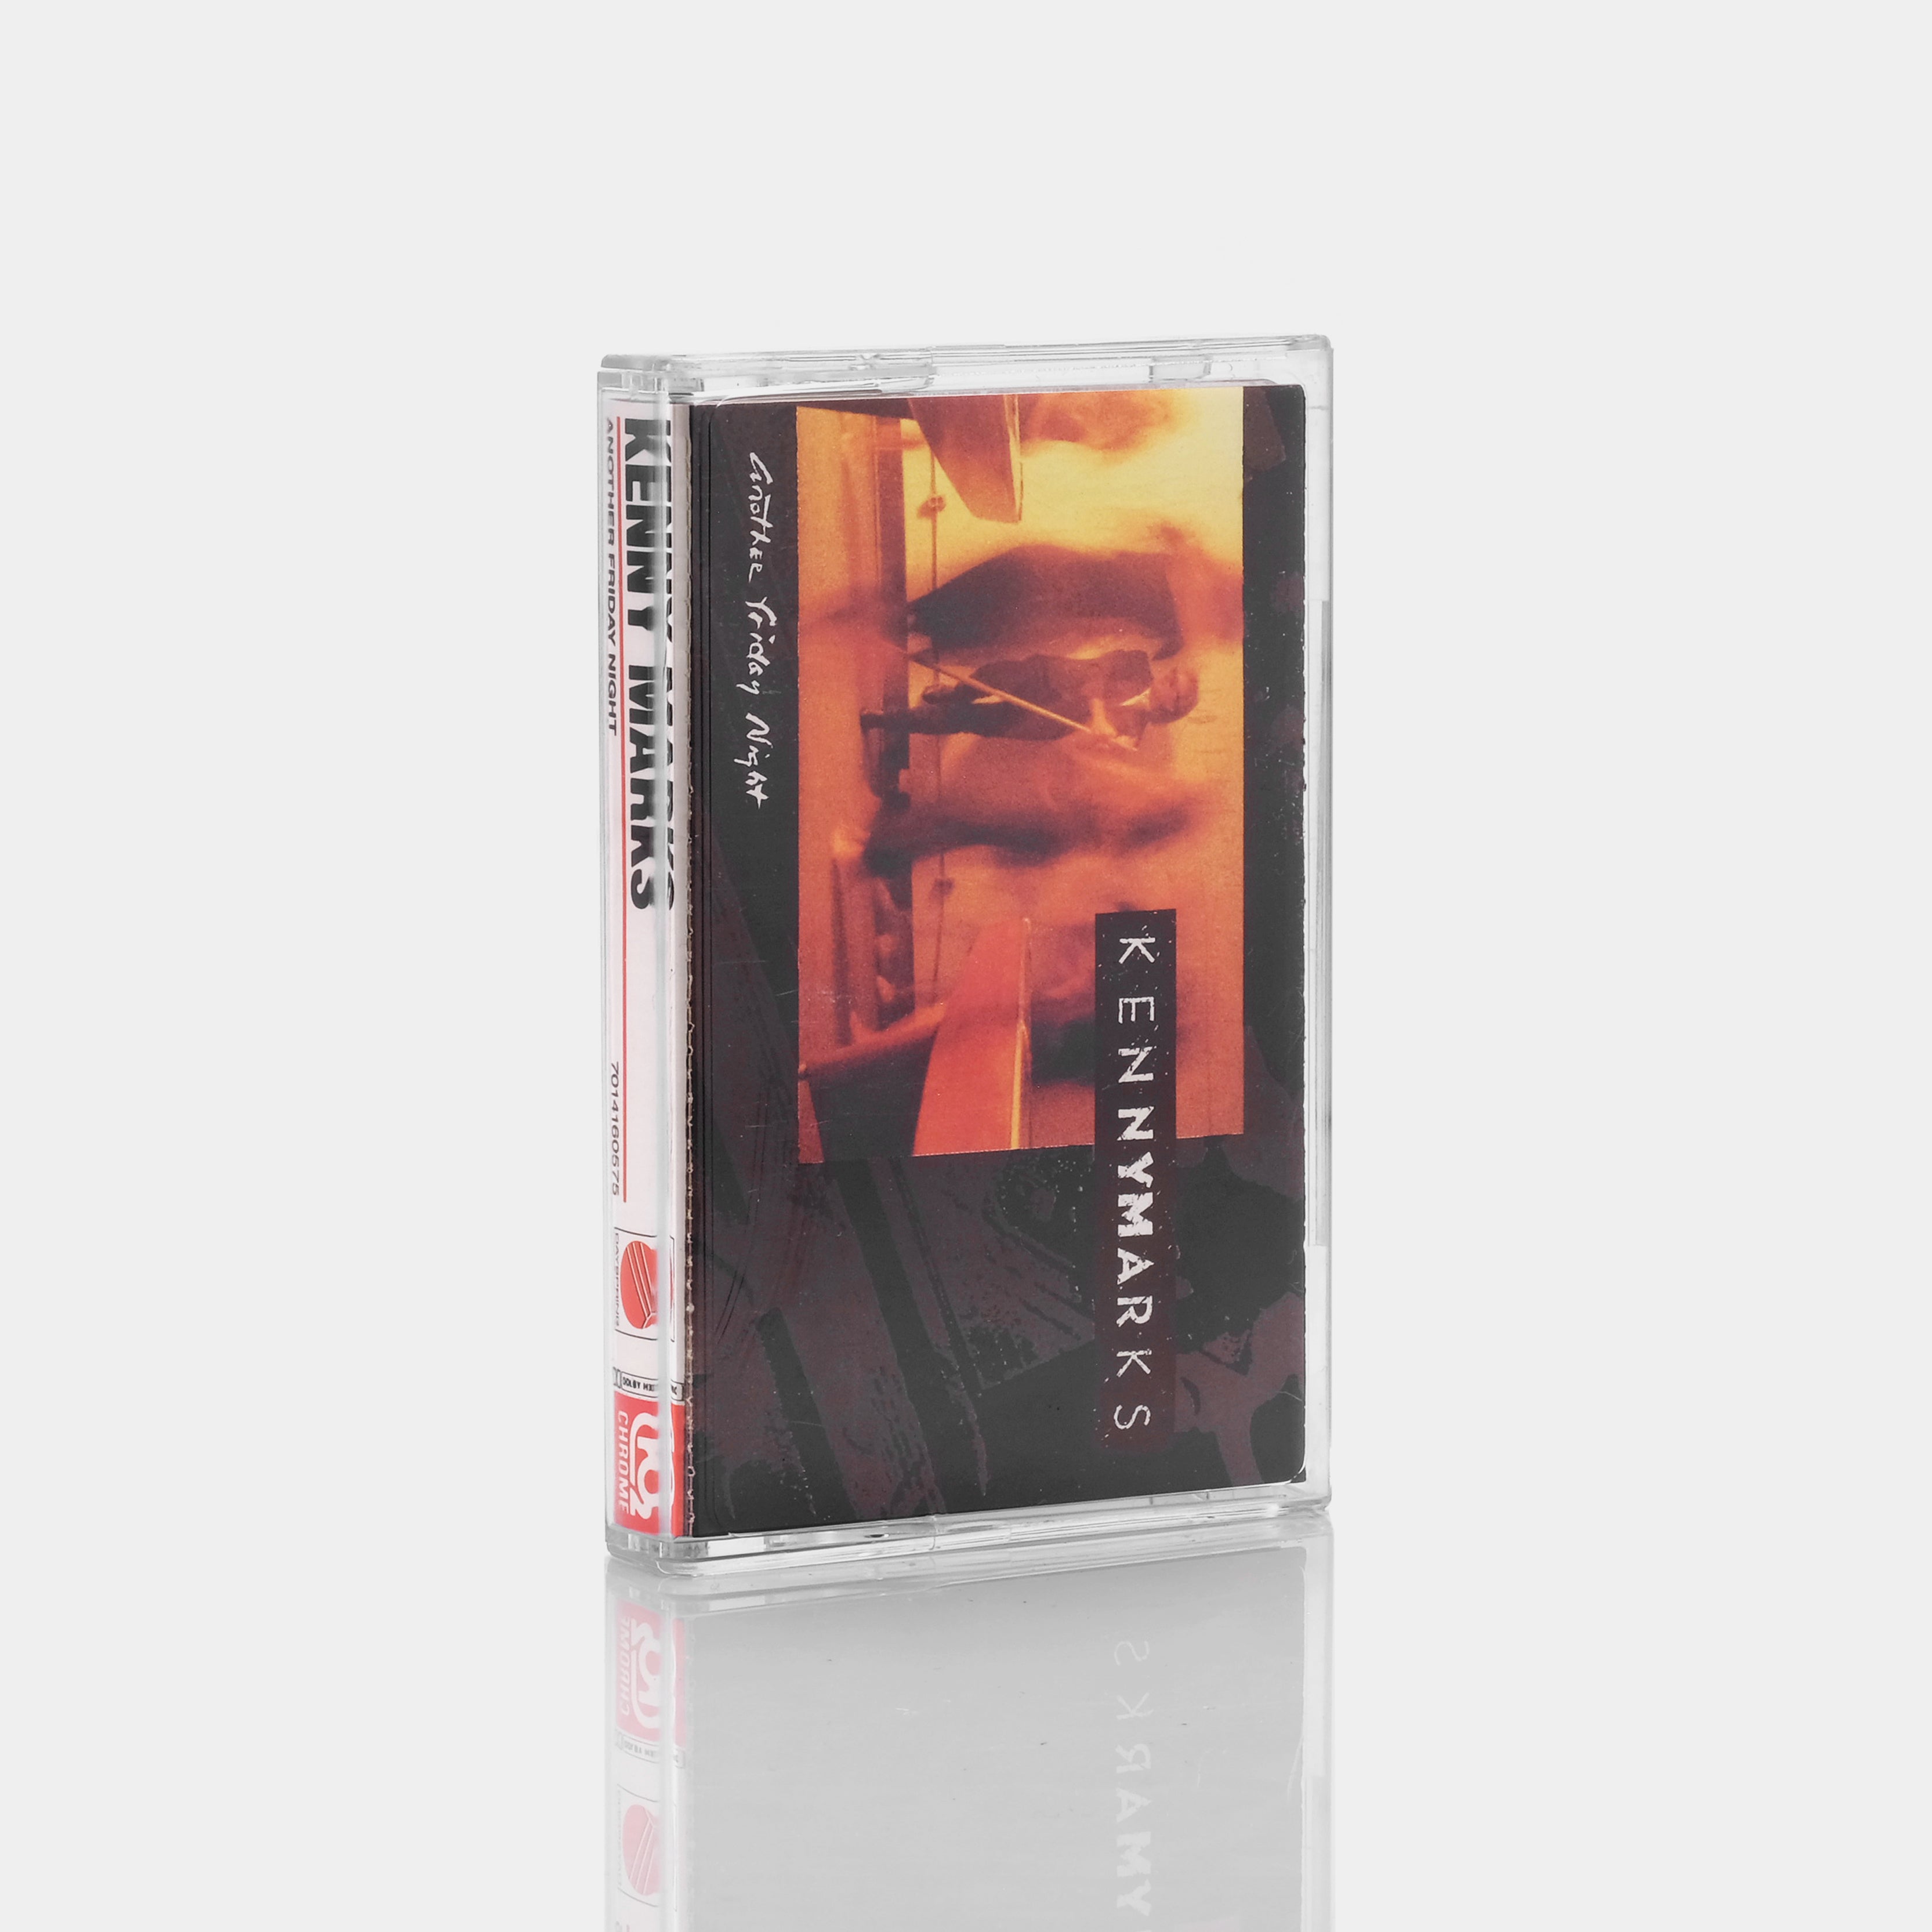 Kenny Marks - Another Friday Night Cassette Tape